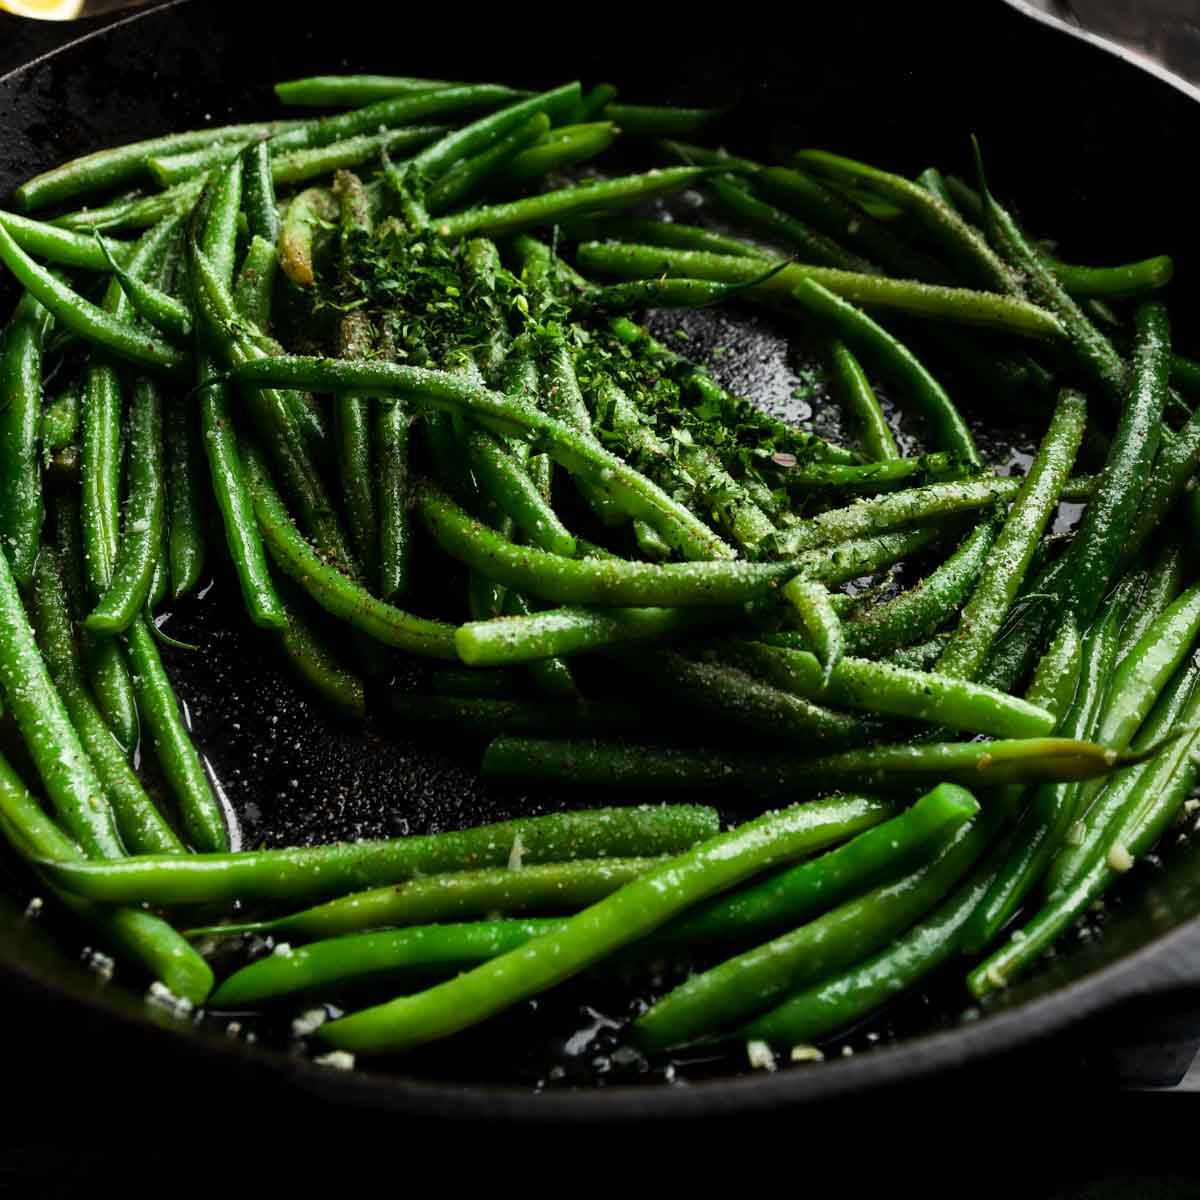 Seasoning the French green beans with salt, pepper, and fresh herbs